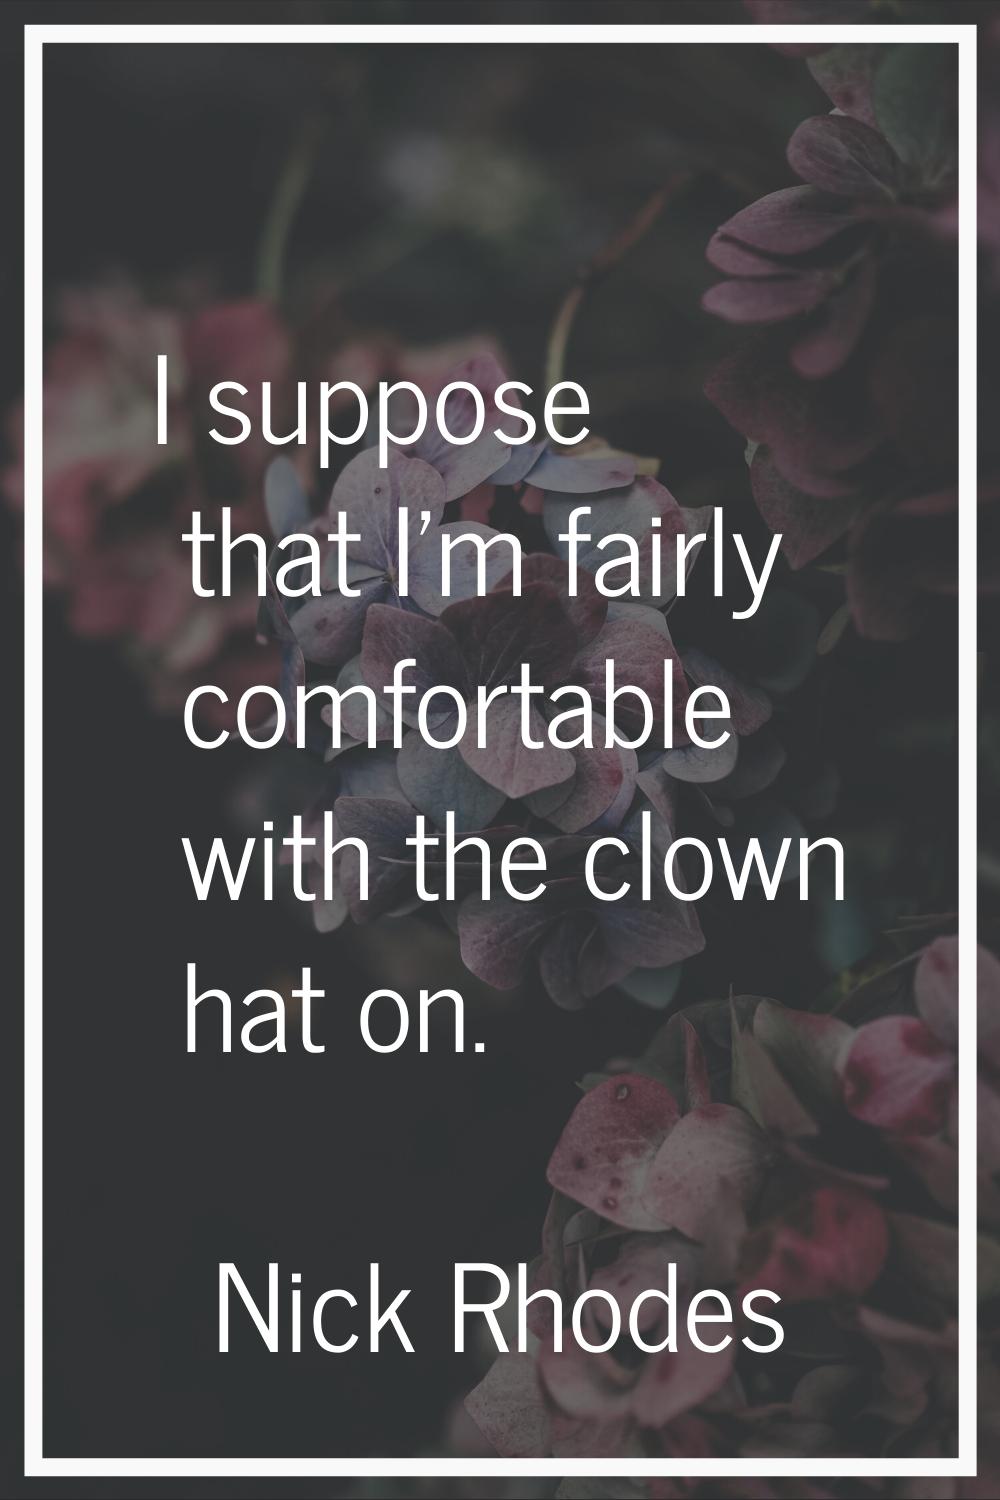 I suppose that I'm fairly comfortable with the clown hat on.